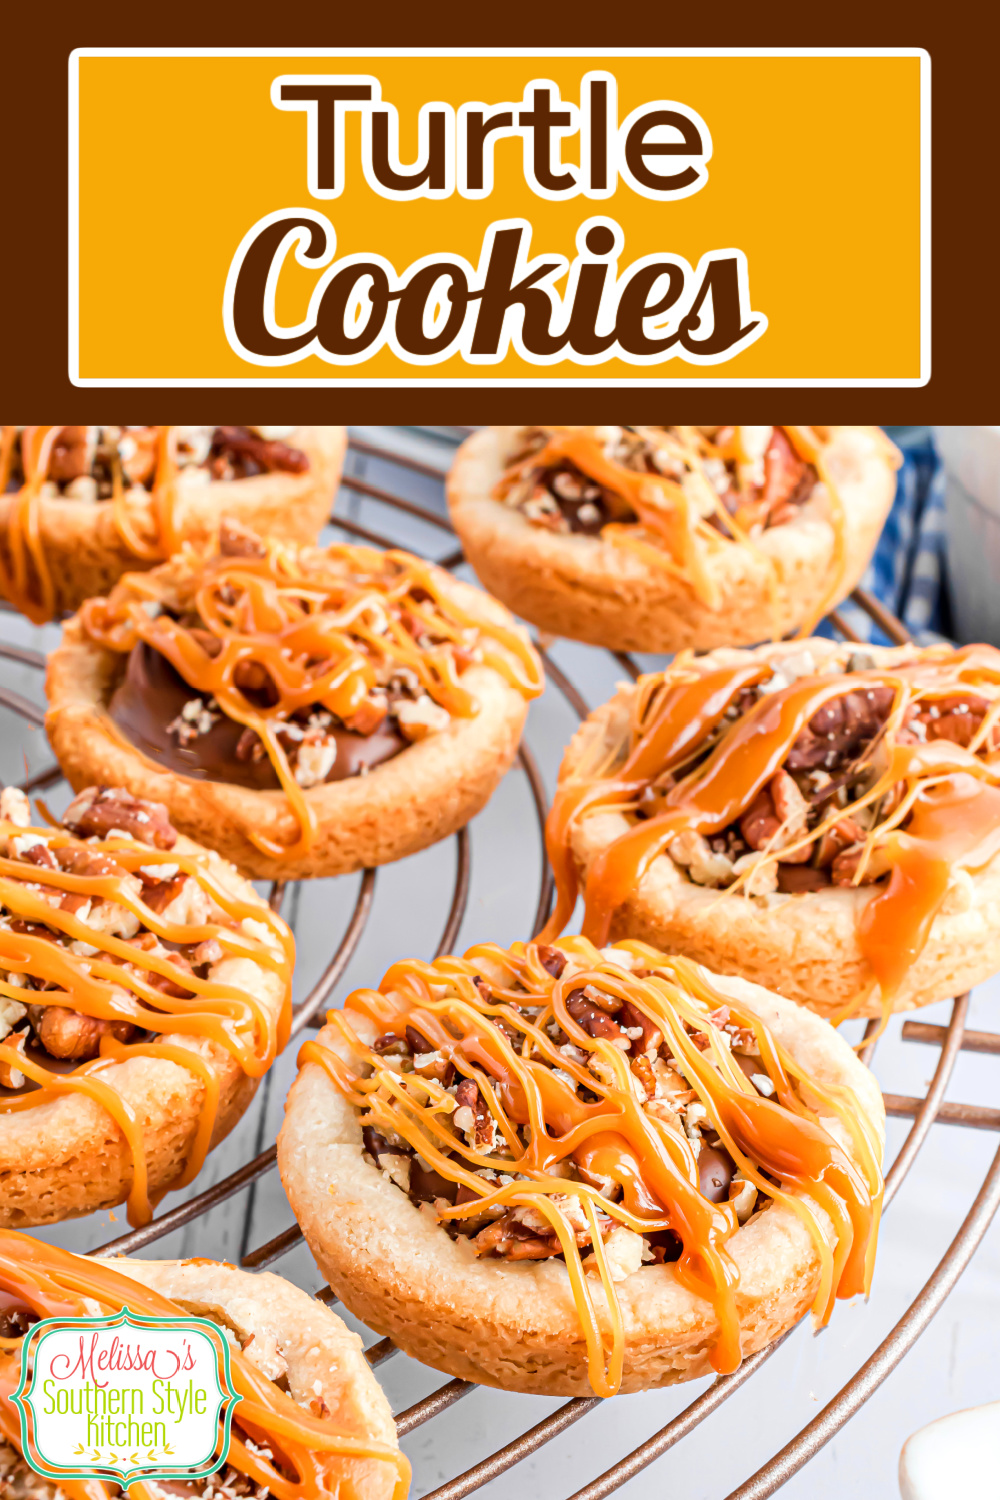 These scratch made Turtle Cookies are baked in a muffin pan to form a delicious cookie bowl to hold the ooey gooey turtle toppings. #turtlecookies #turtlecookiecups #turtles #chocolate #caramelcookies #pecans #pecancookies #cookiebowls